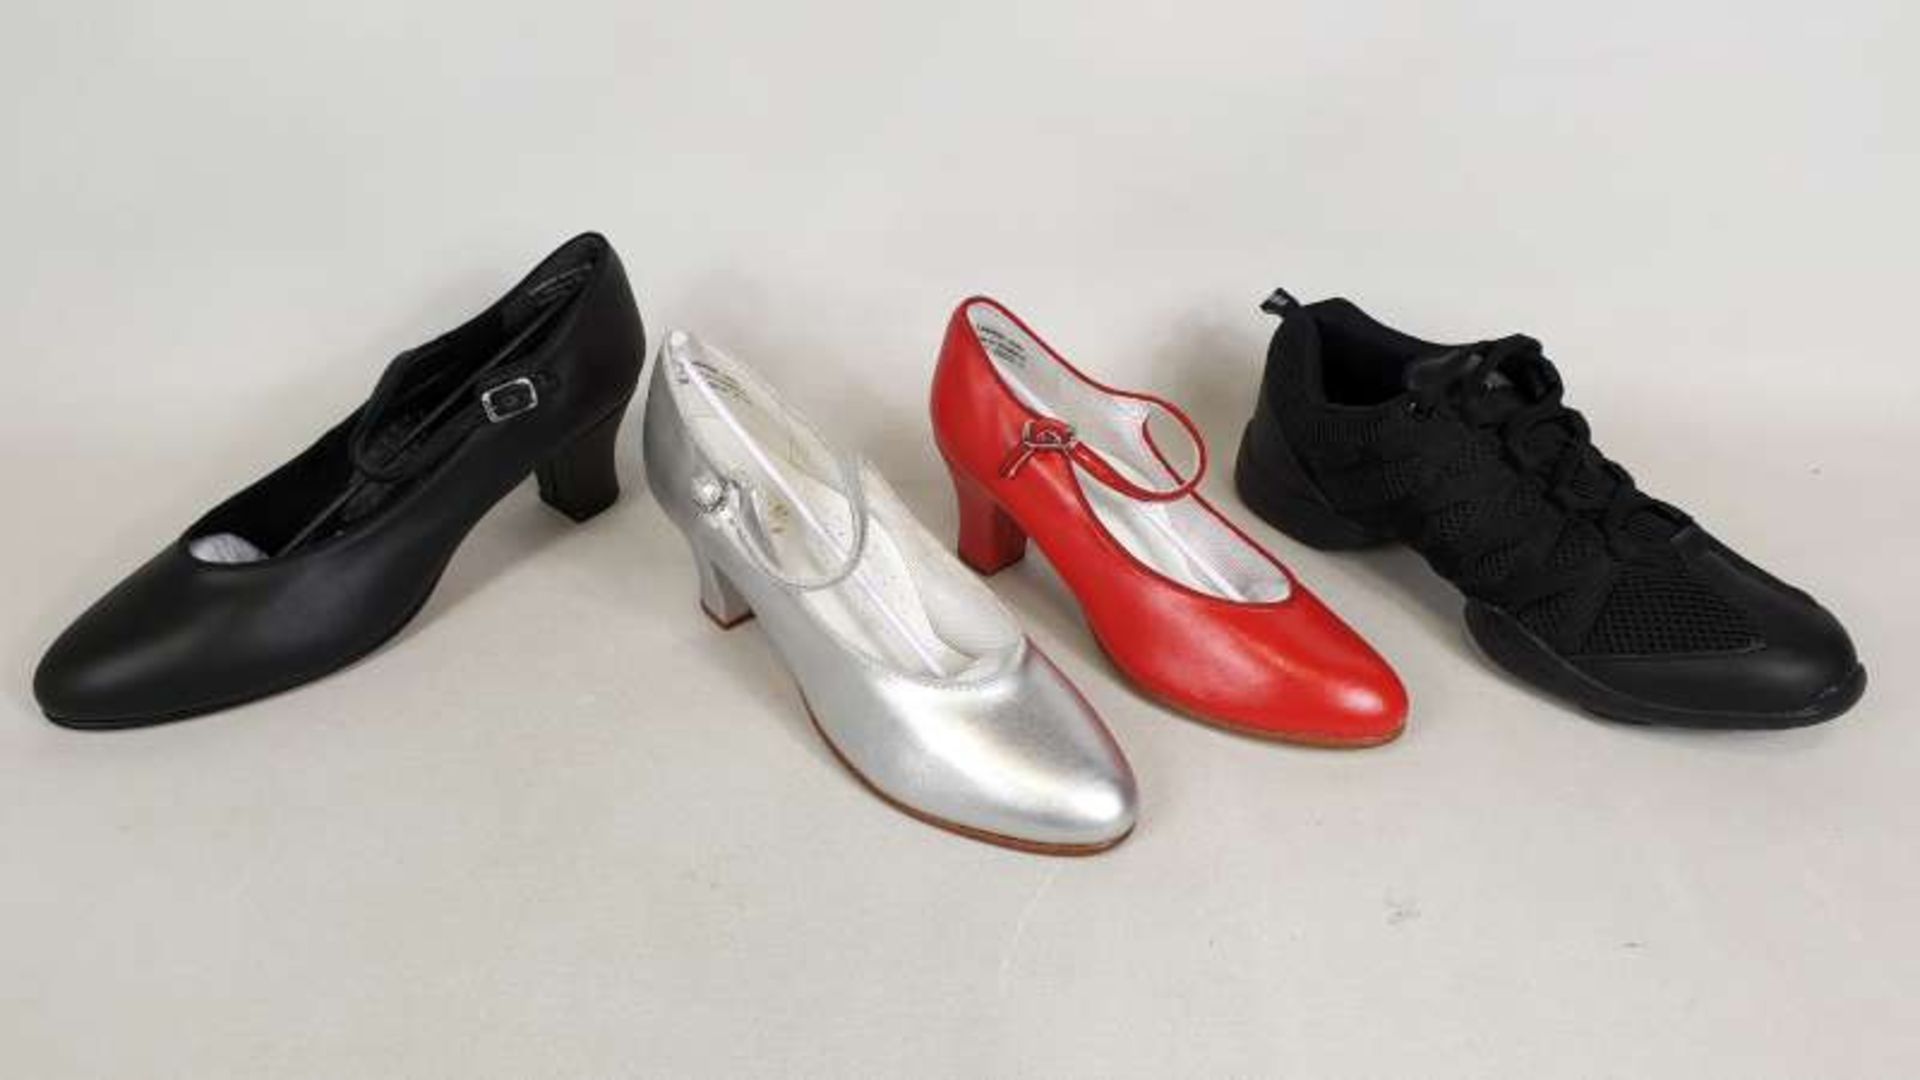 25 X BRAND NEW DANCE SHOES IN VARIOUS STYLES AND SIZES